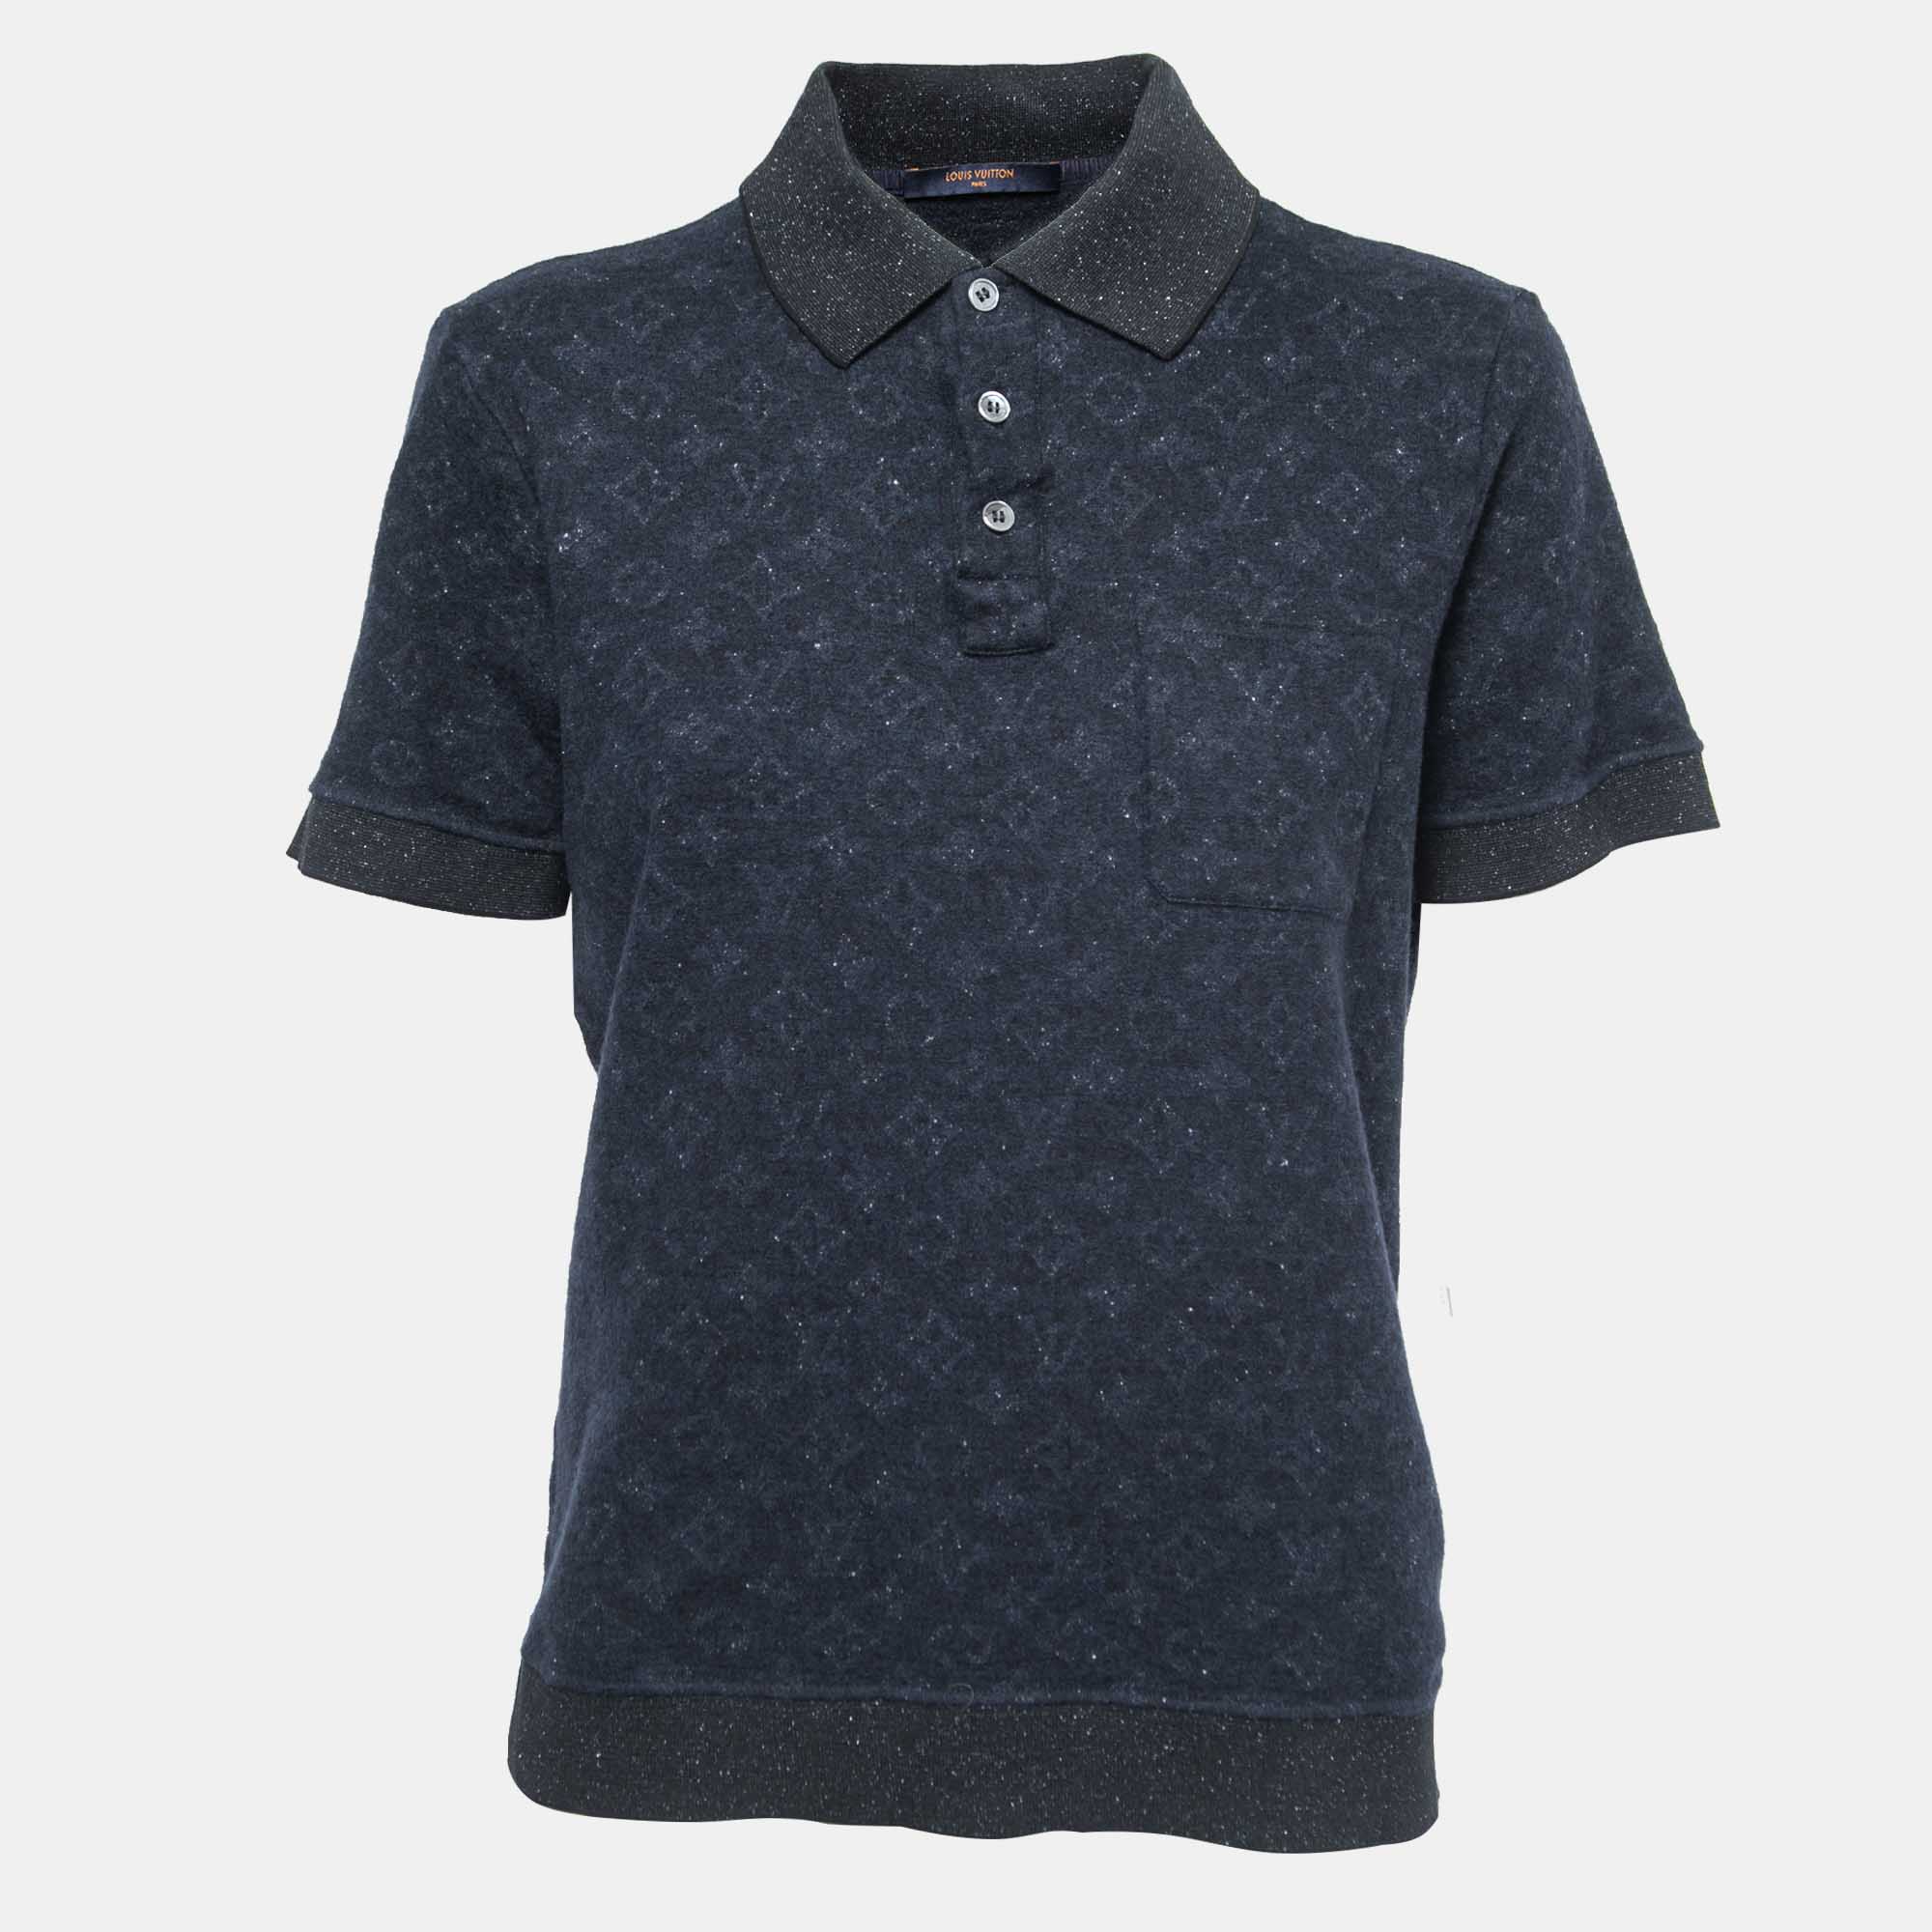 LOUIS VUITTON Pre-owned Navy Blue Monogram Patterned Knit Polo T-shirt Xl